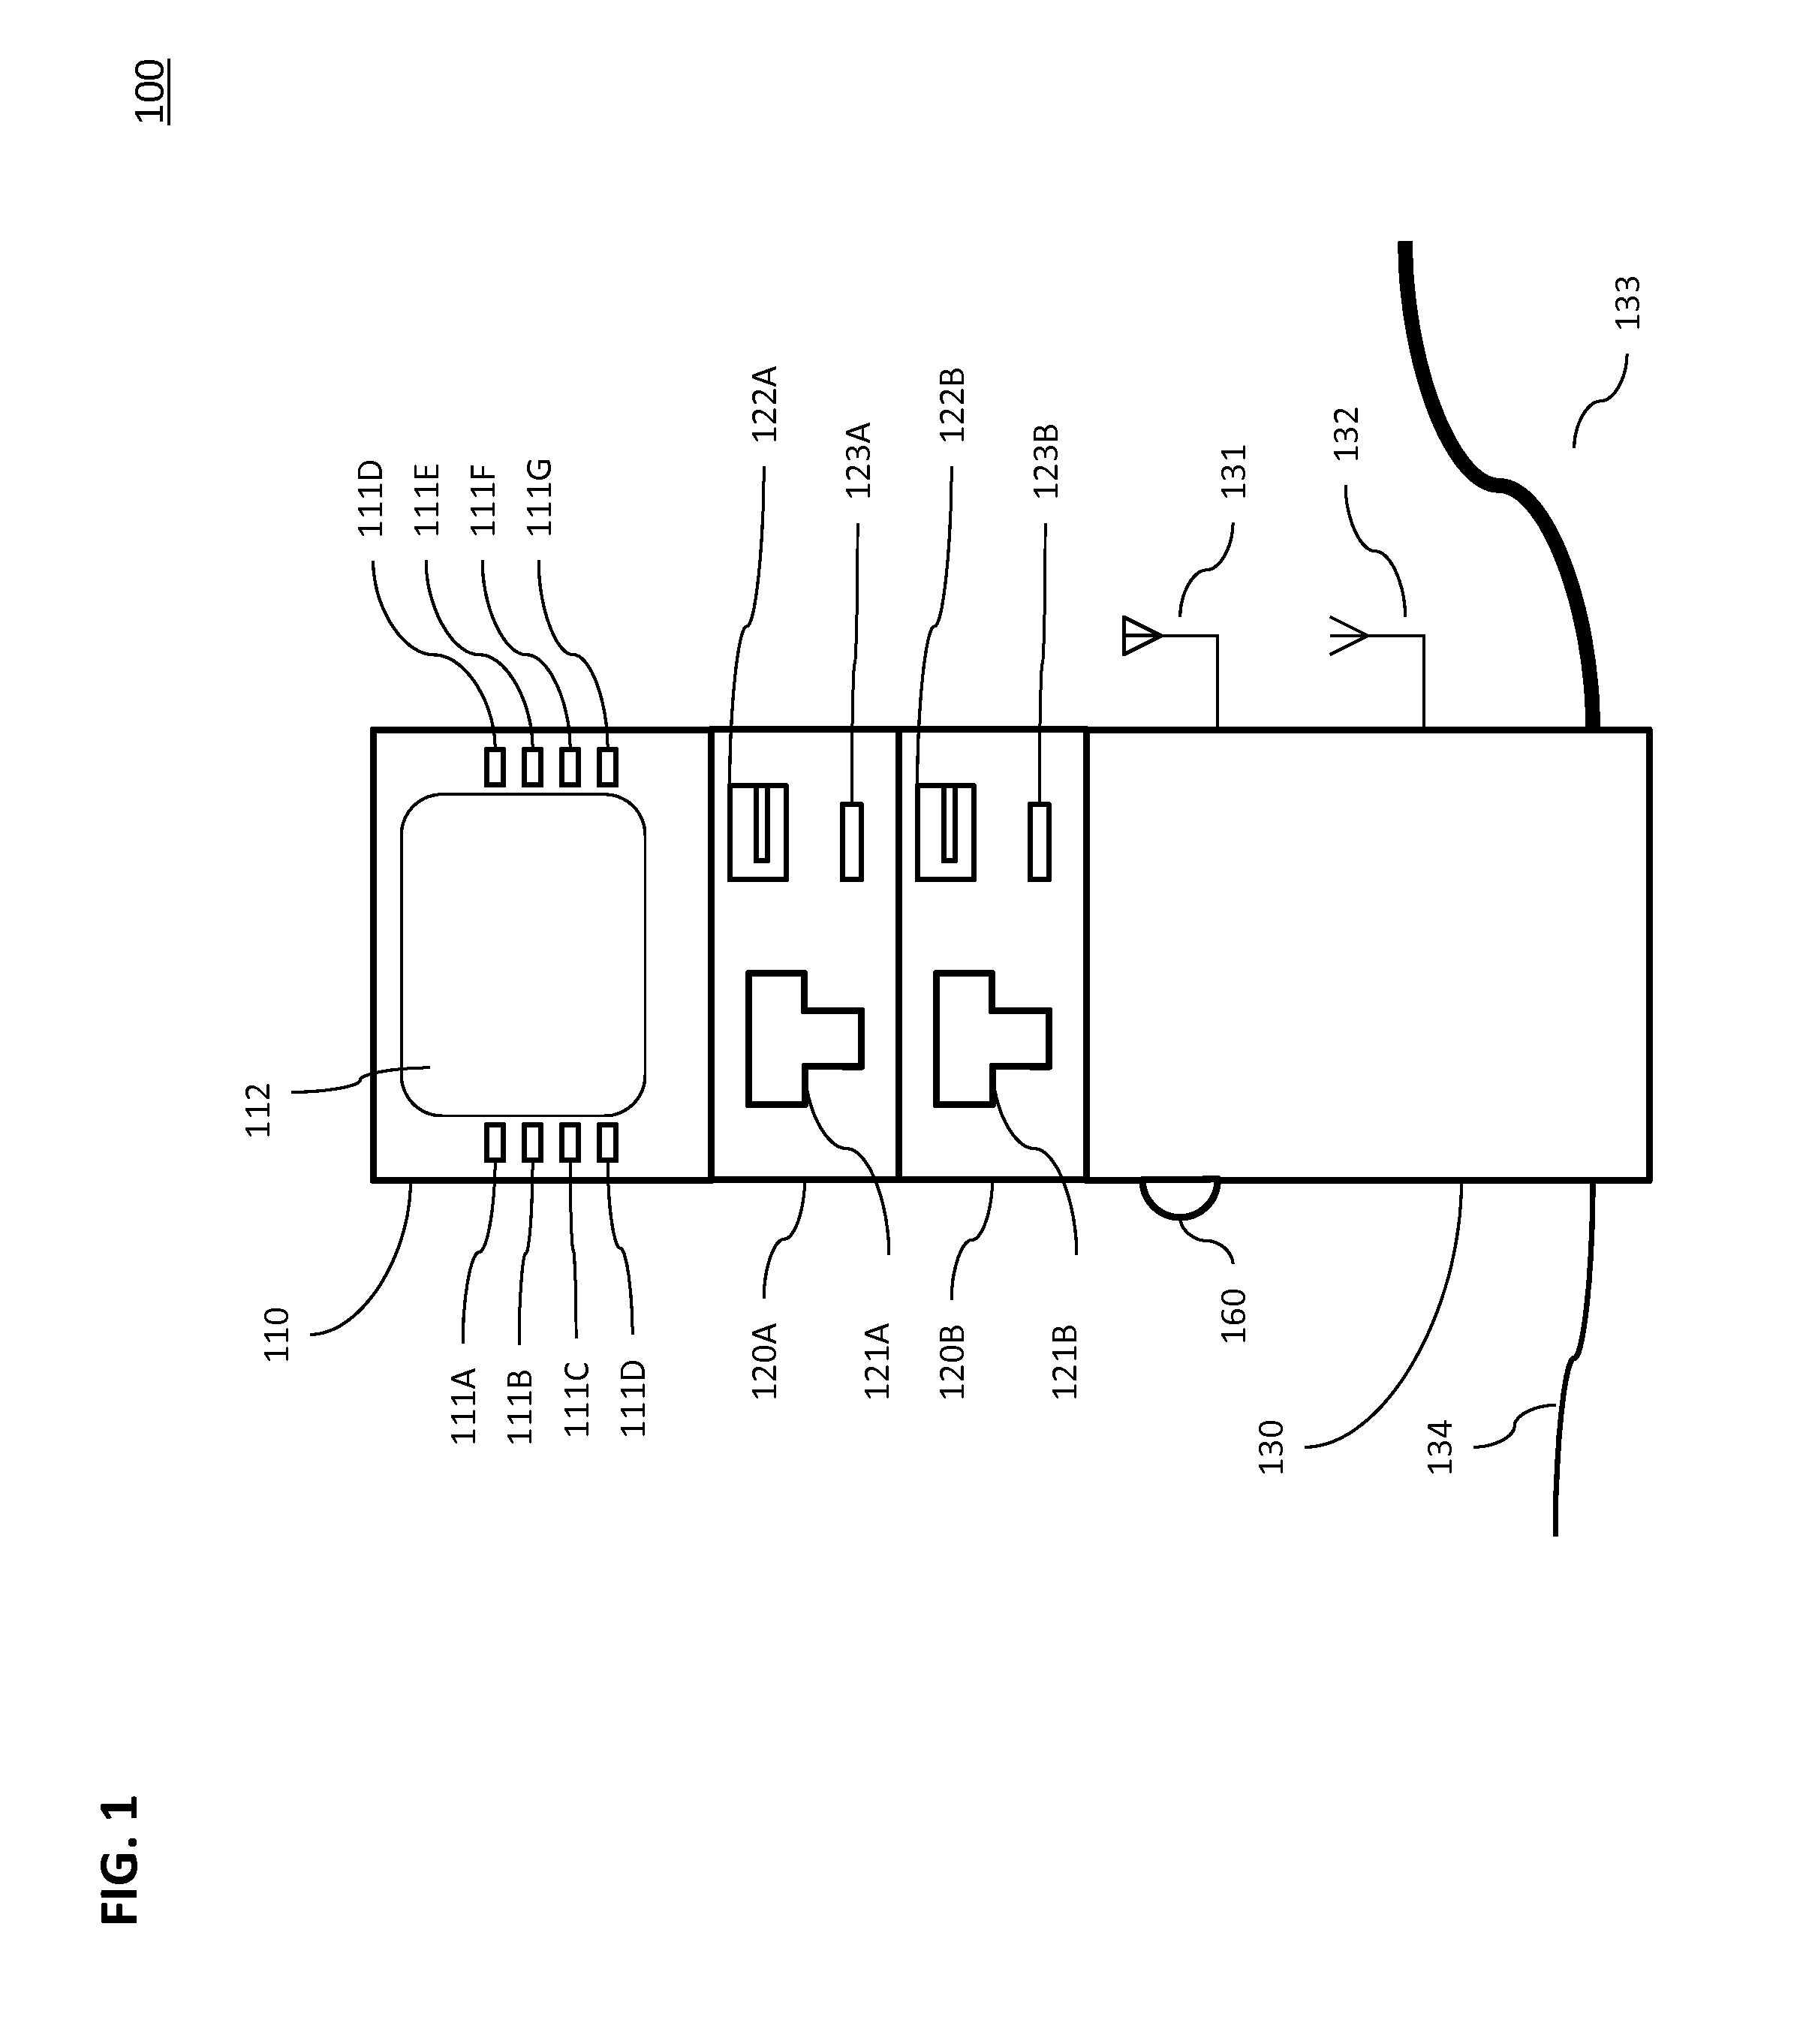 Method and apparatus for improving access to an ATM during a disaster